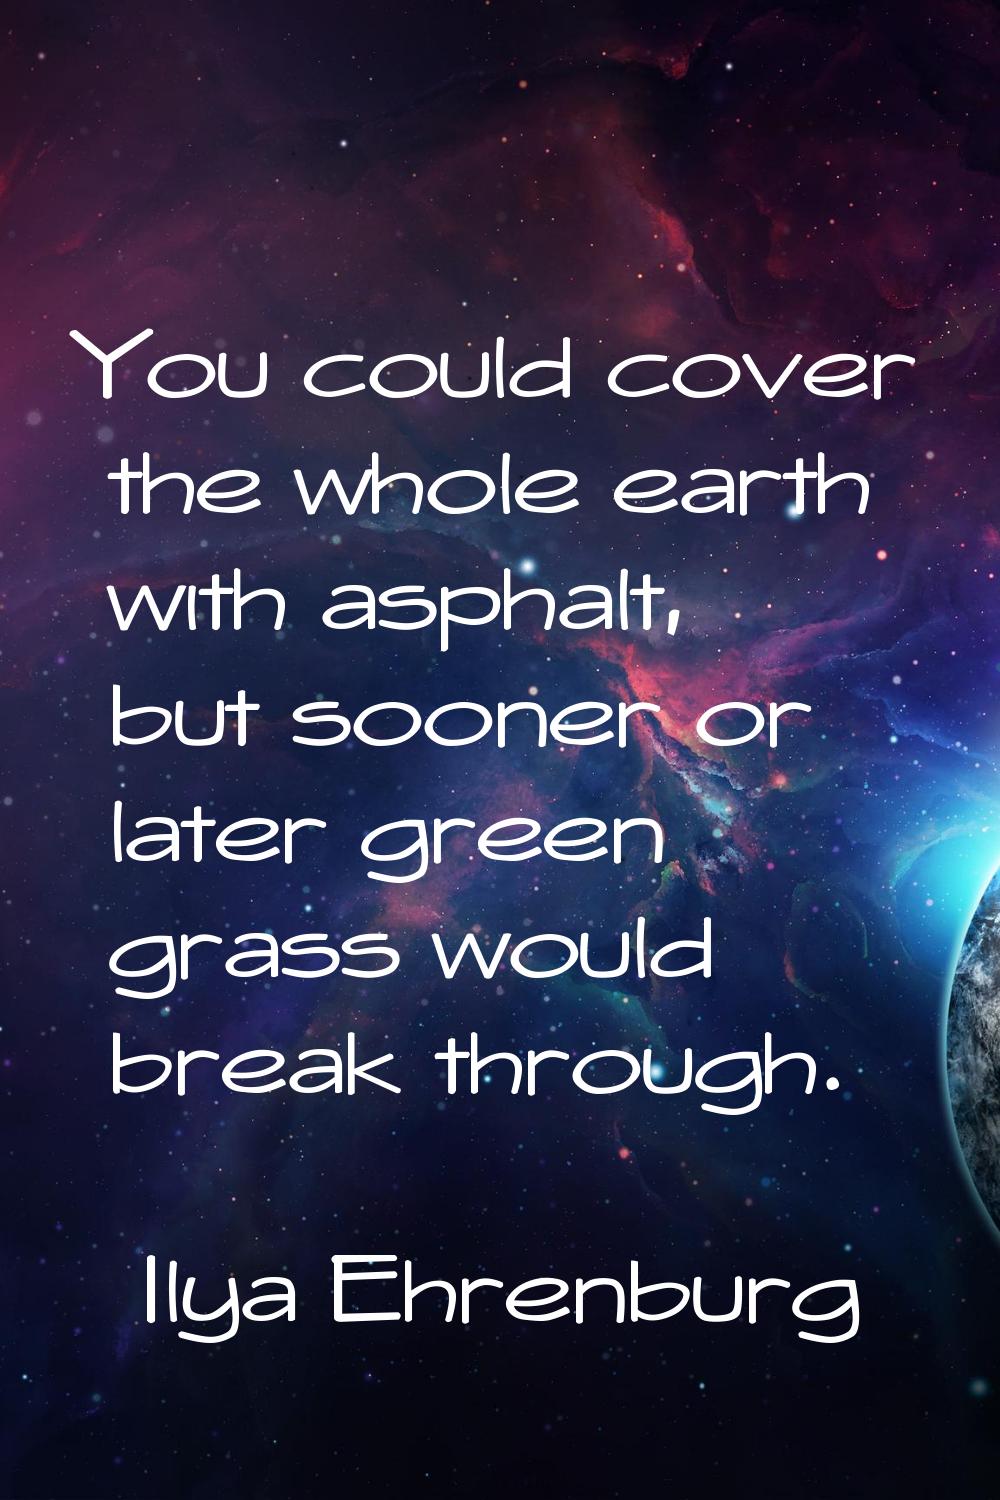 You could cover the whole earth with asphalt, but sooner or later green grass would break through.